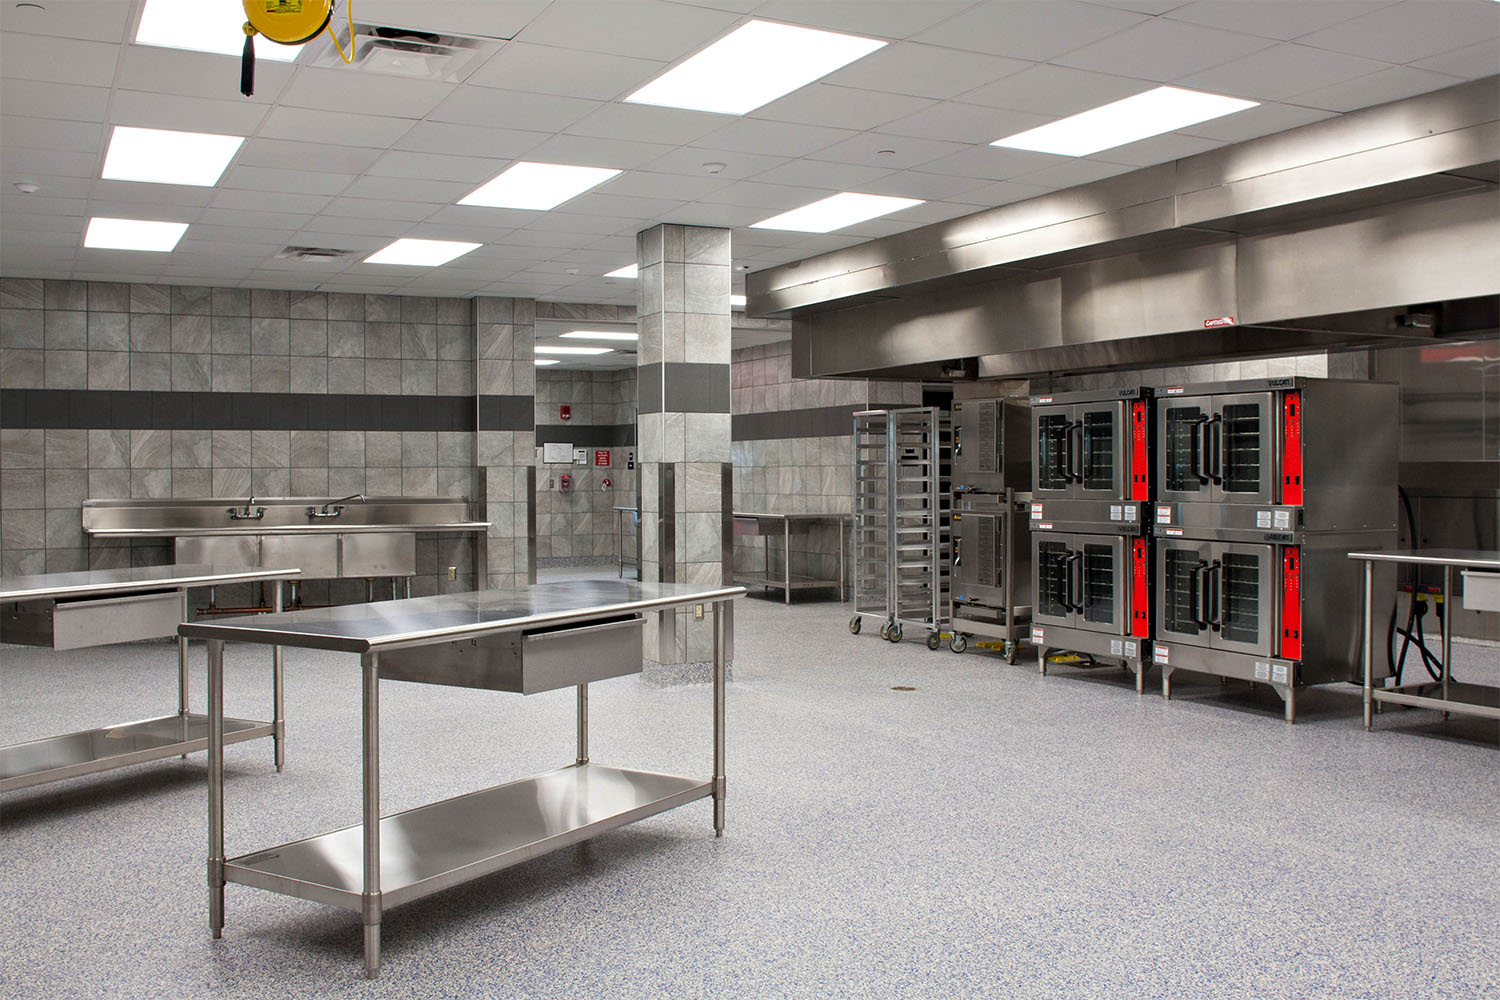 Kitchen and food prep area with stainless steel kitchen equipment